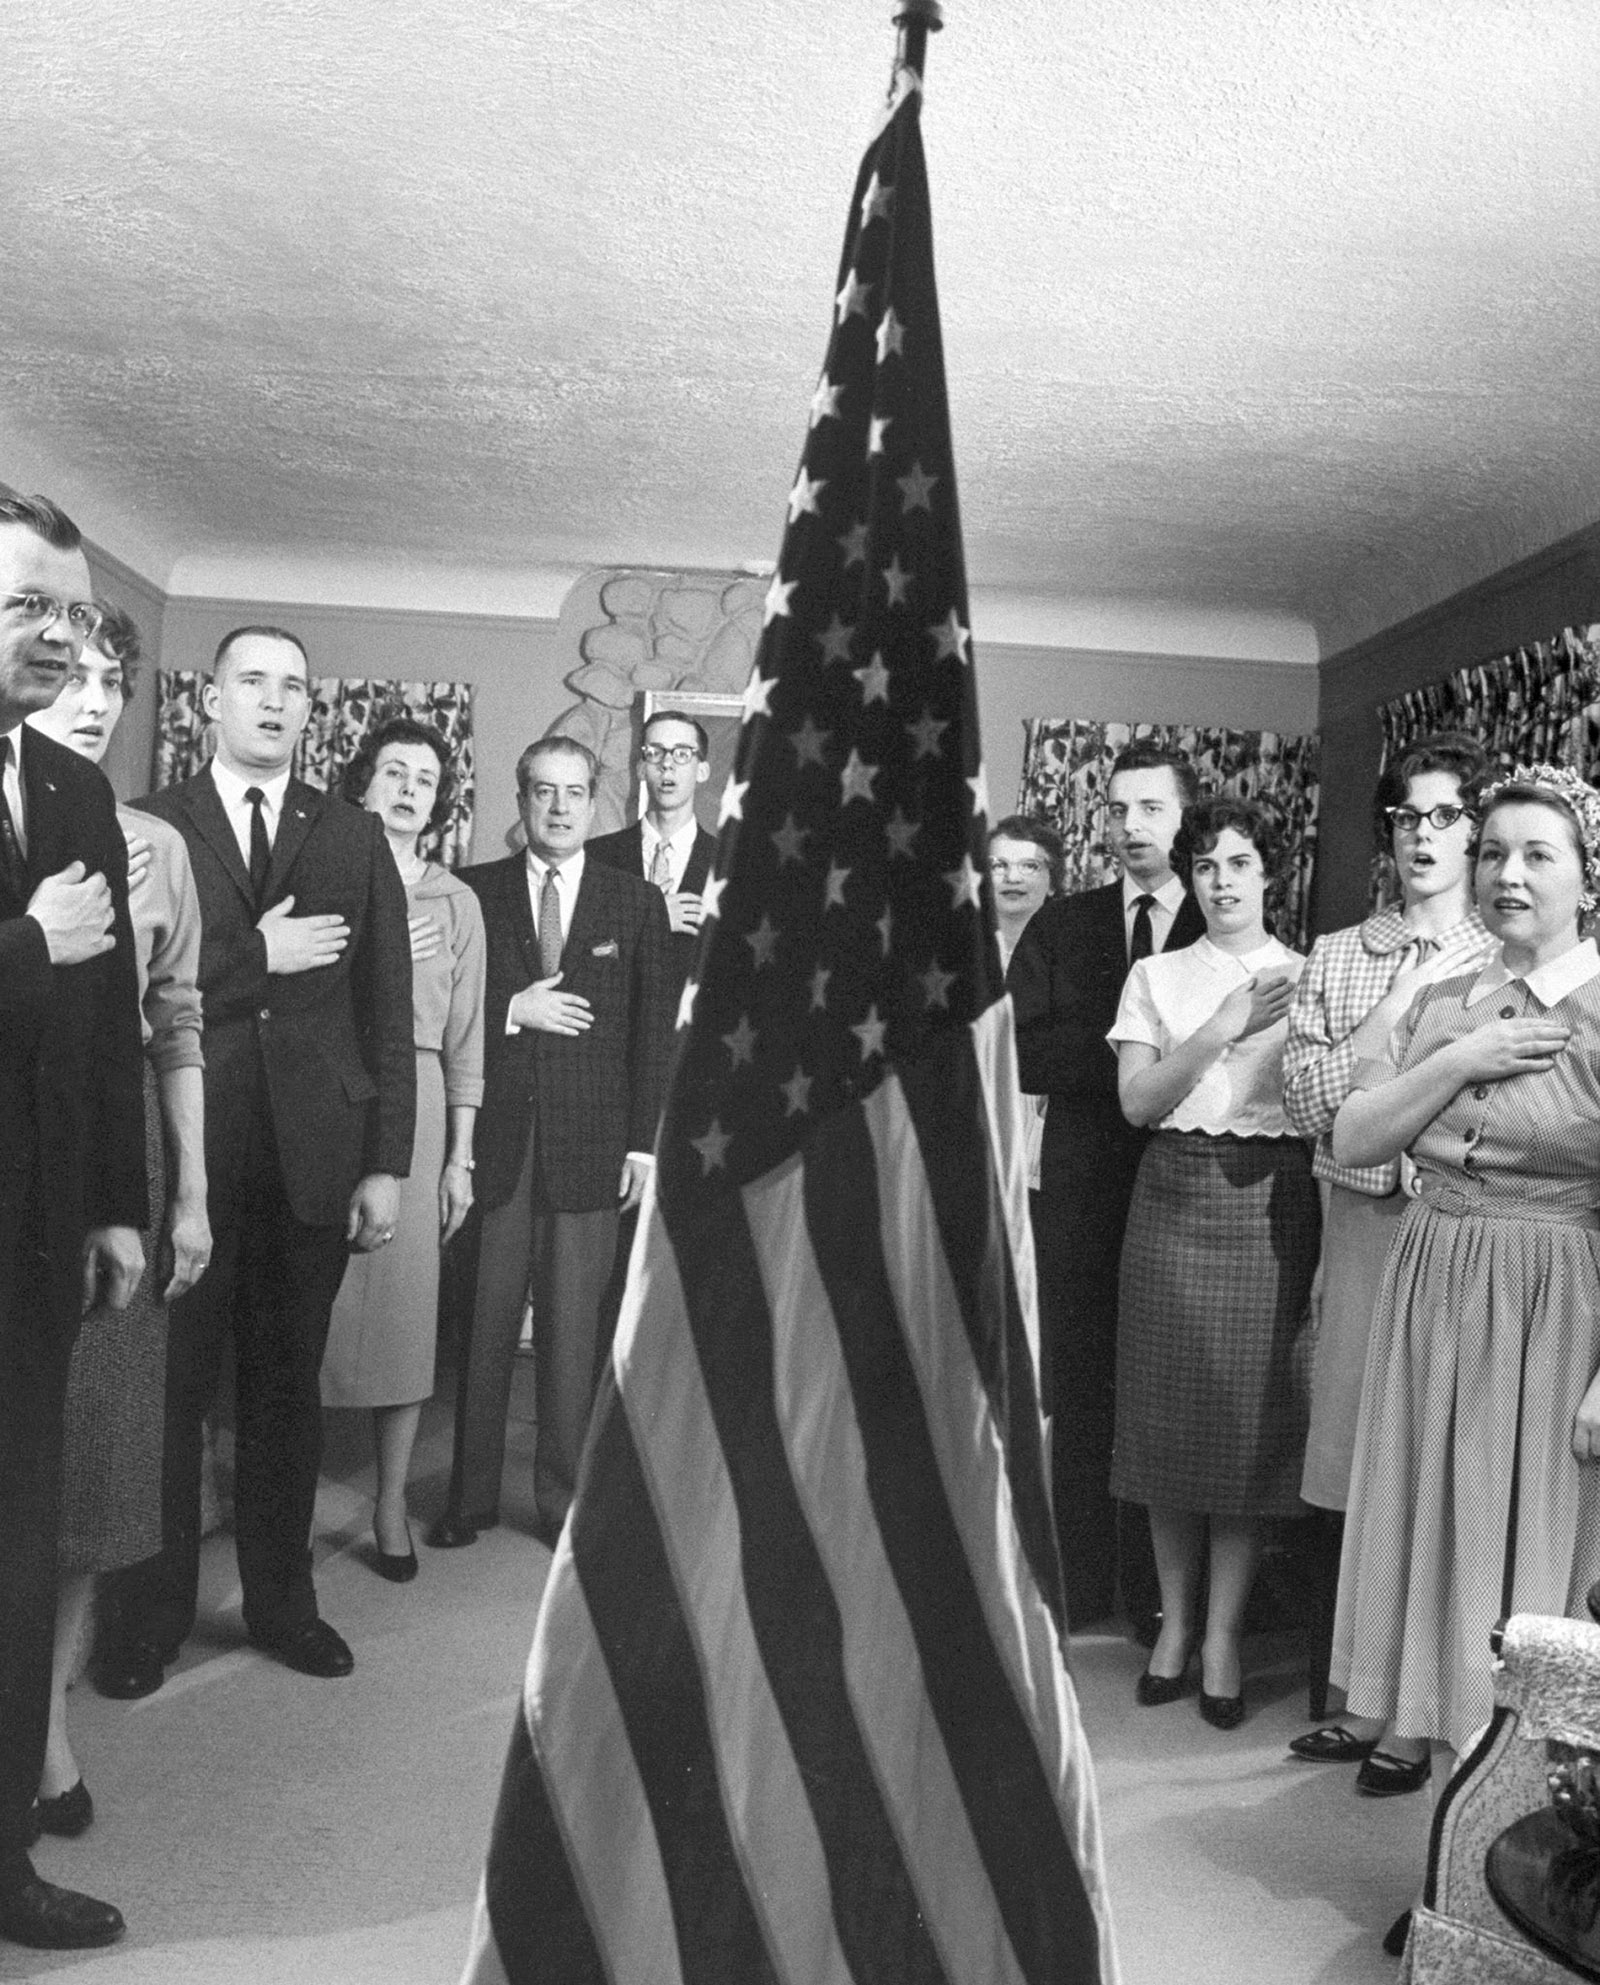 Members of the John Birch Society pledging allegiance to the flag